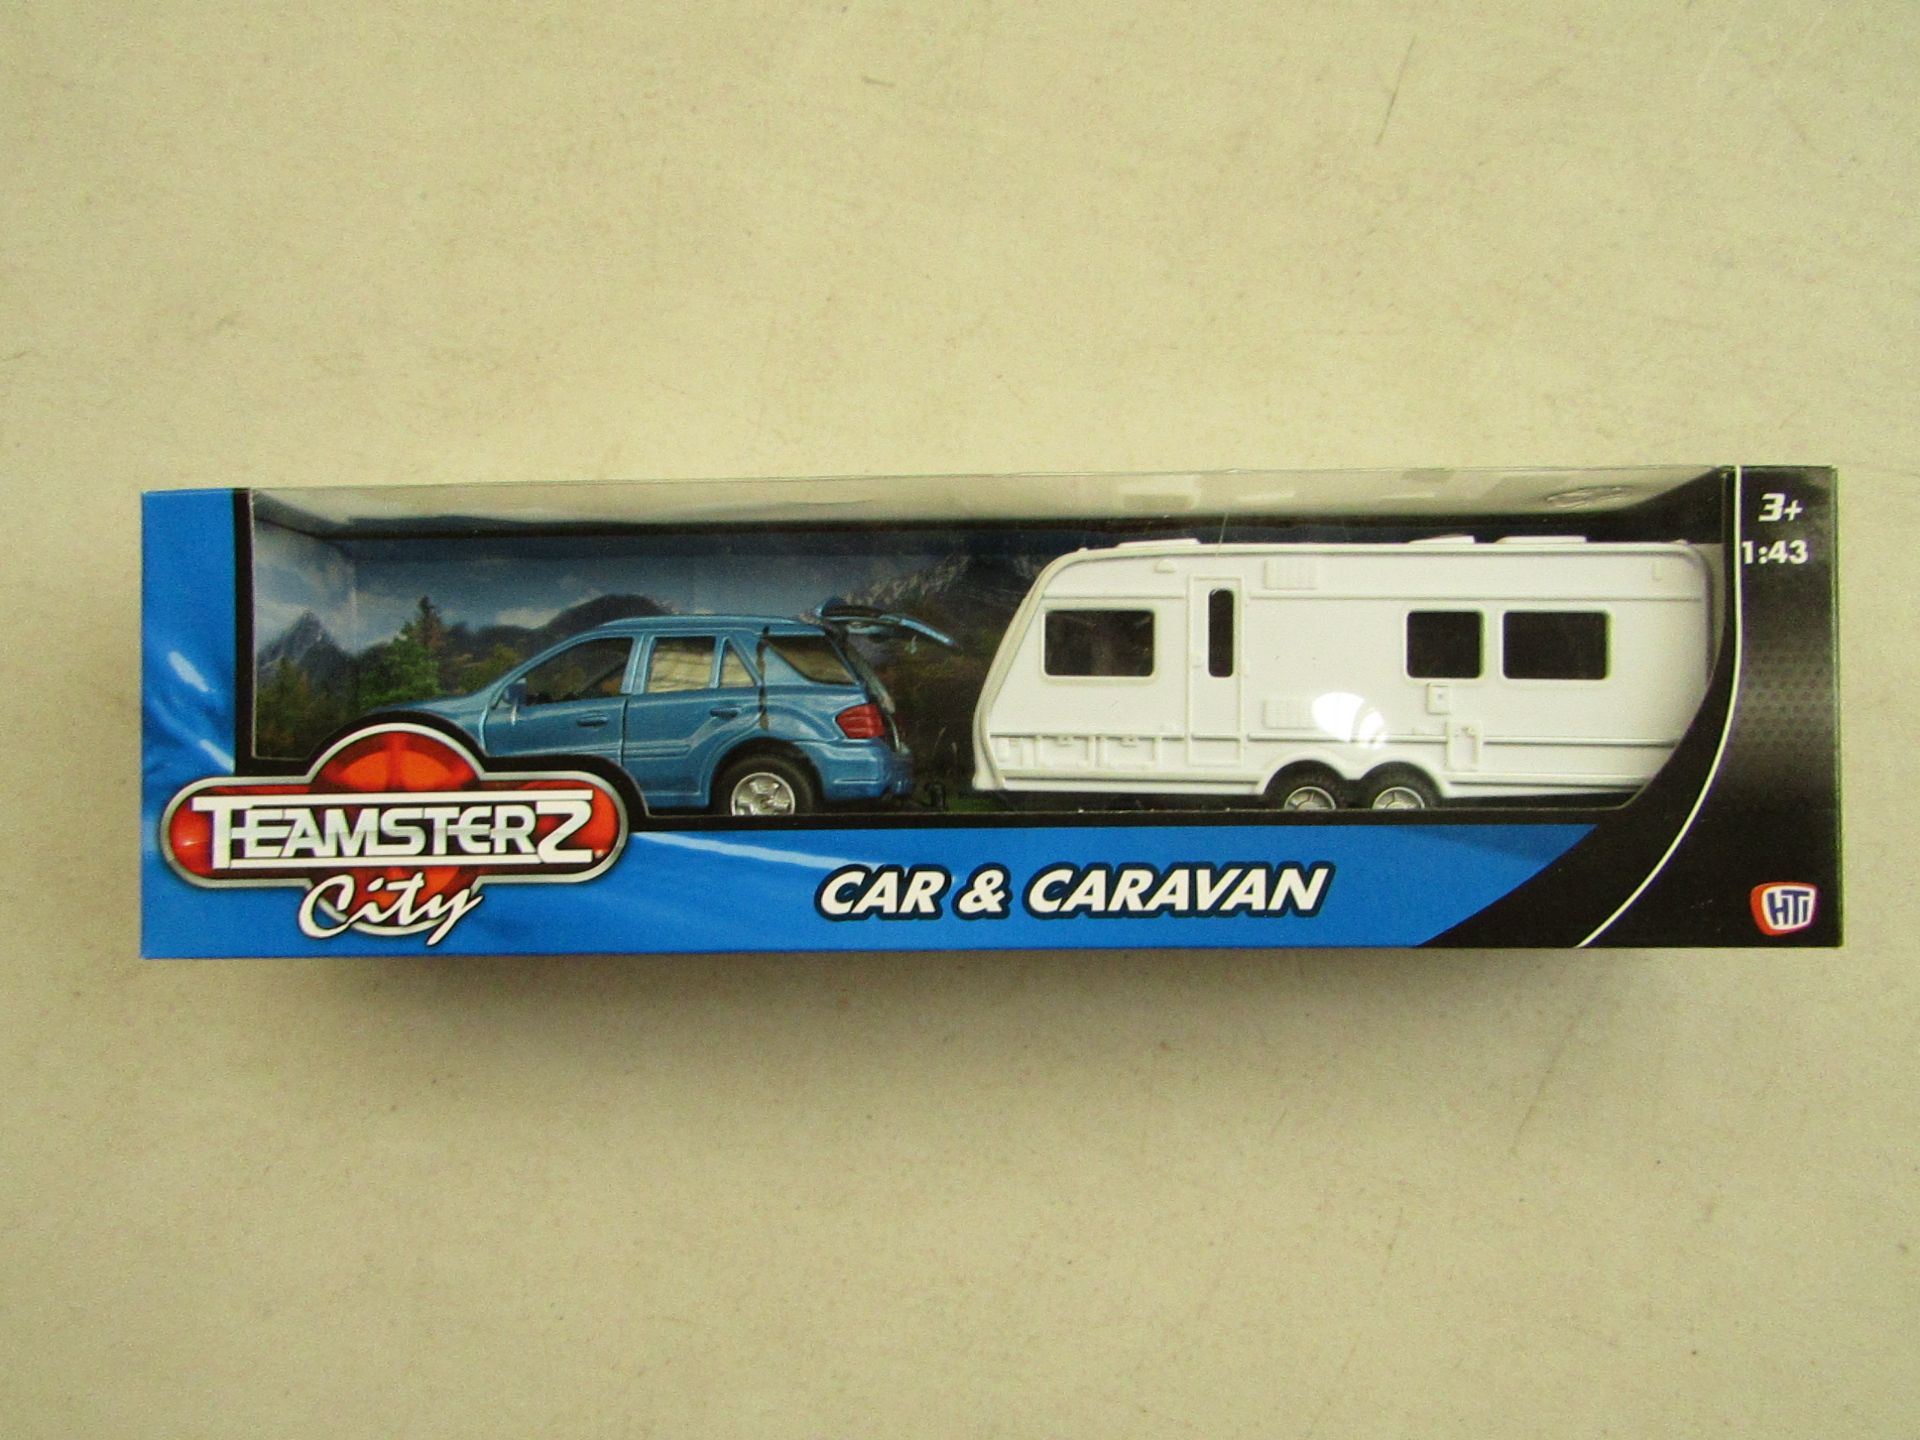 Teamsterz city car & caravan, new and boxed.